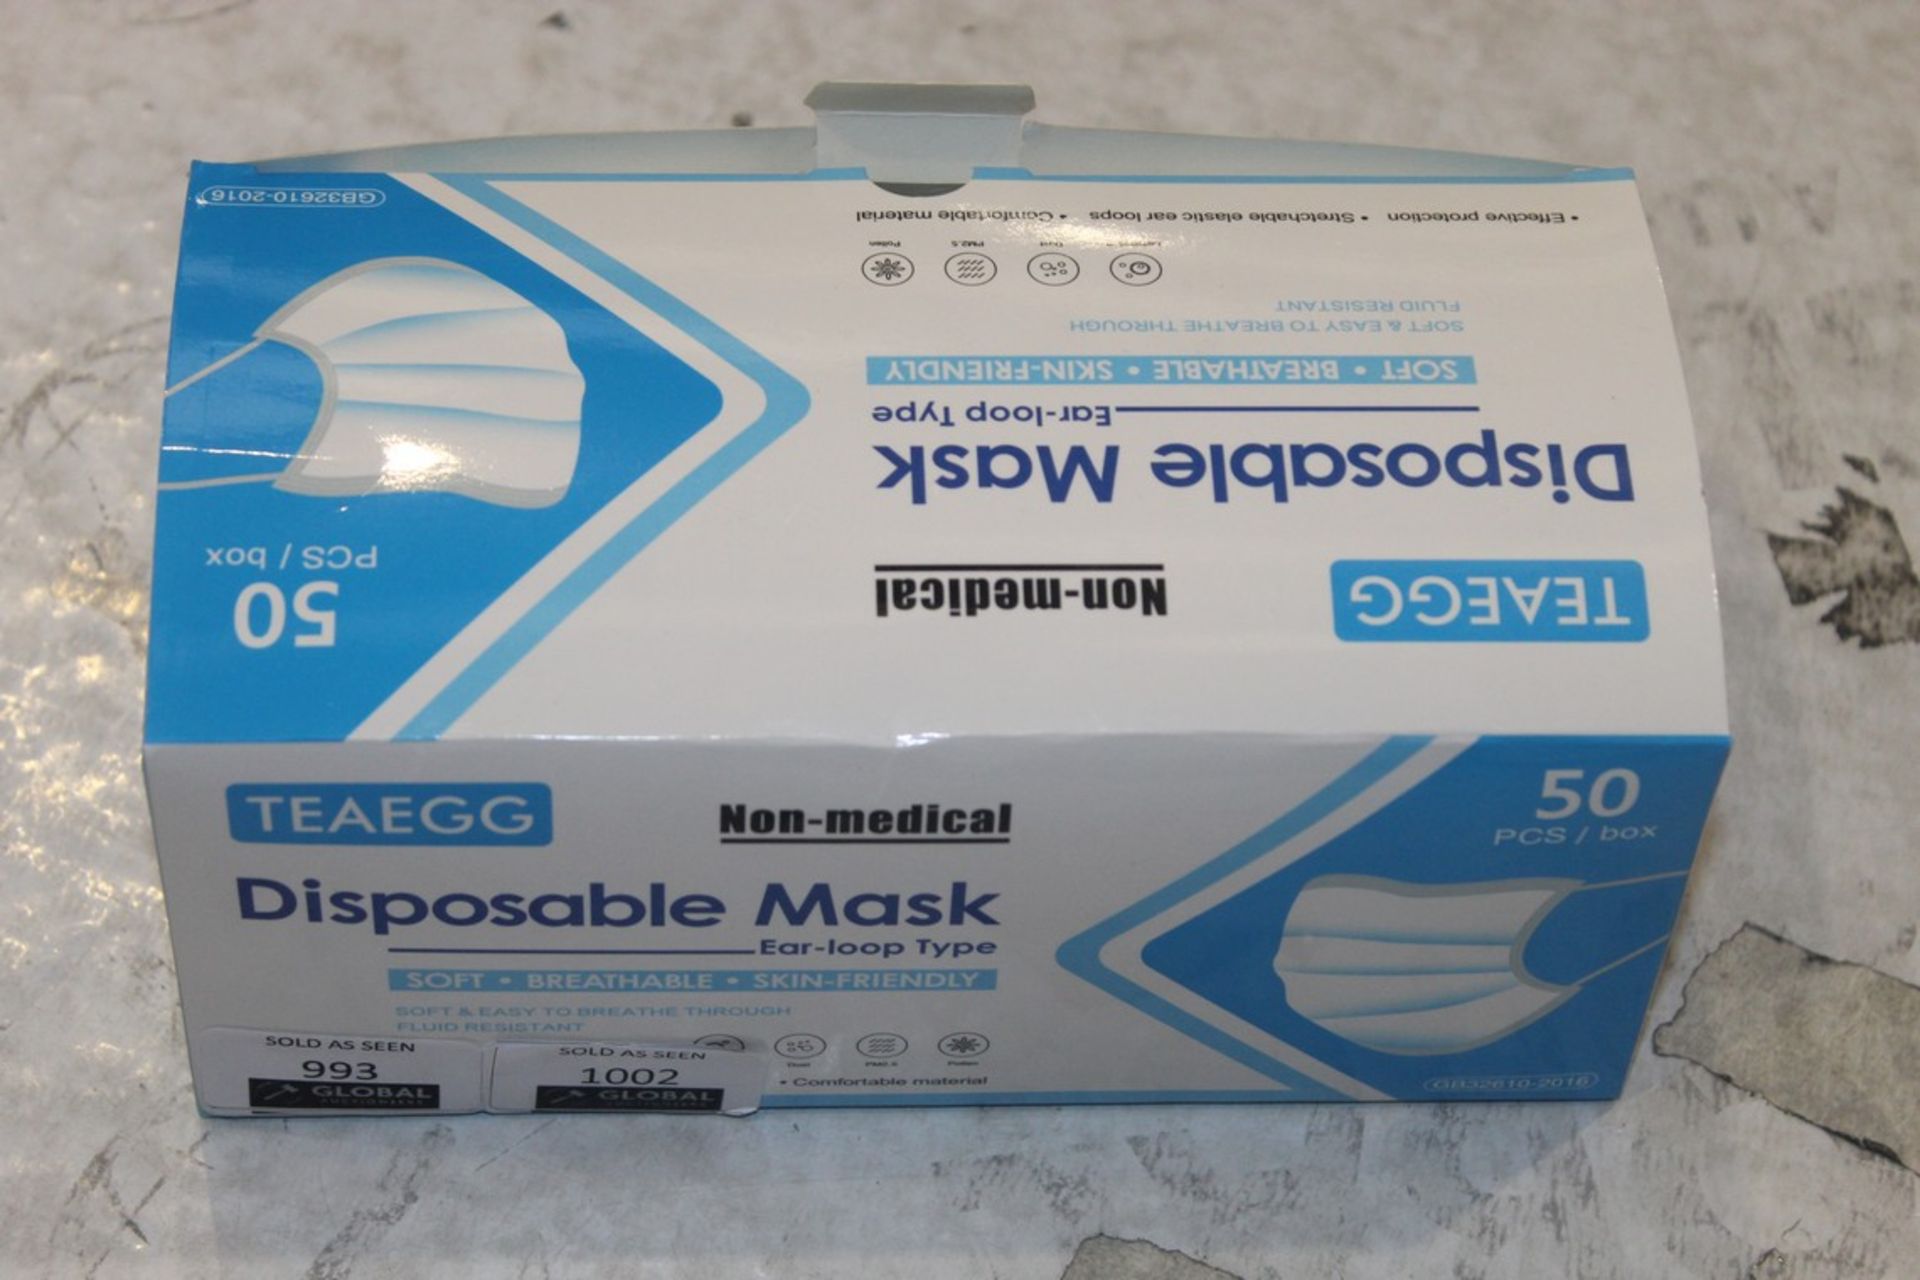 Boxed Of 50 Brand Tea Egg Non Medical Disposable Masks RRP £ (Appraisals Are Available Upon Request)